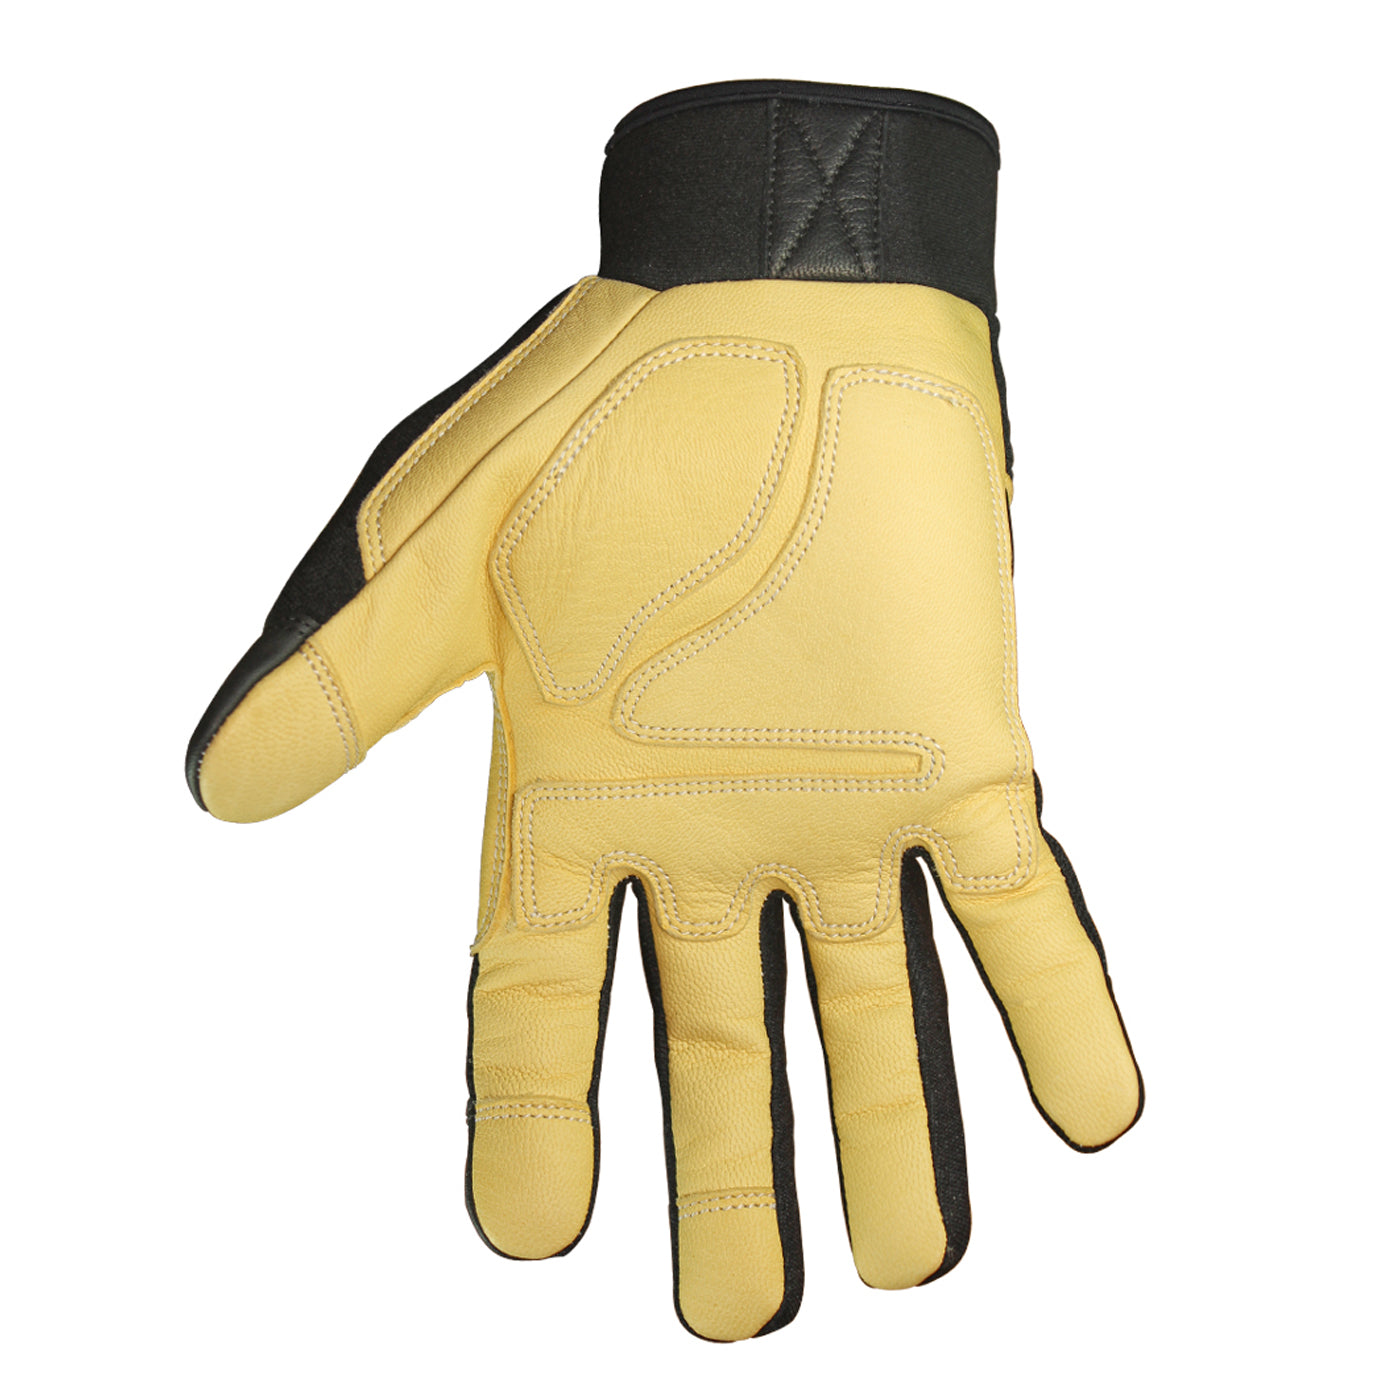 12-3185-70 Youngstown Hybrid XT Glove - Main image